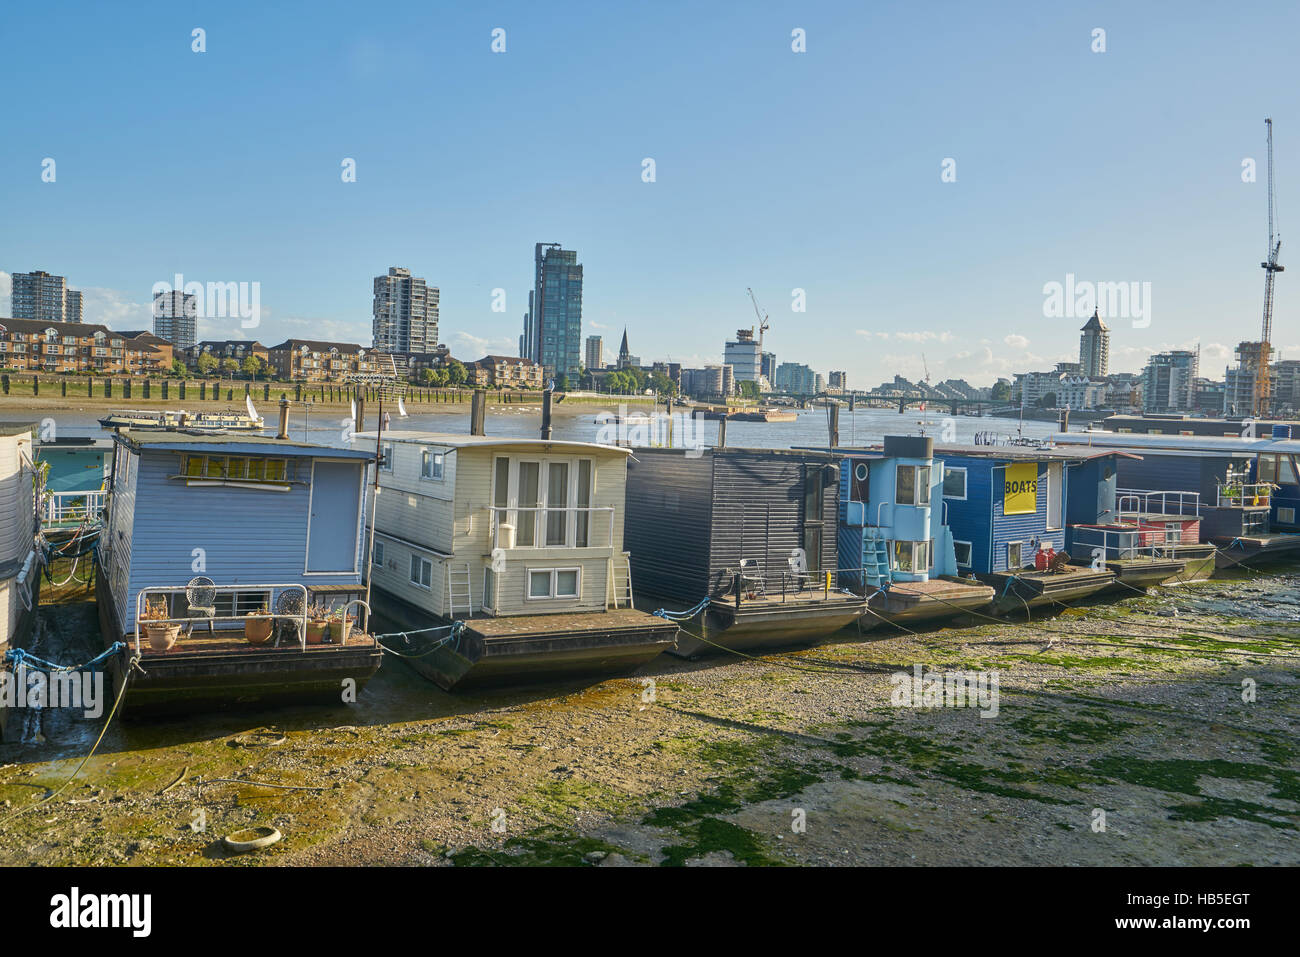 House Boats, Chelsea. Thames House Boat. Banque D'Images